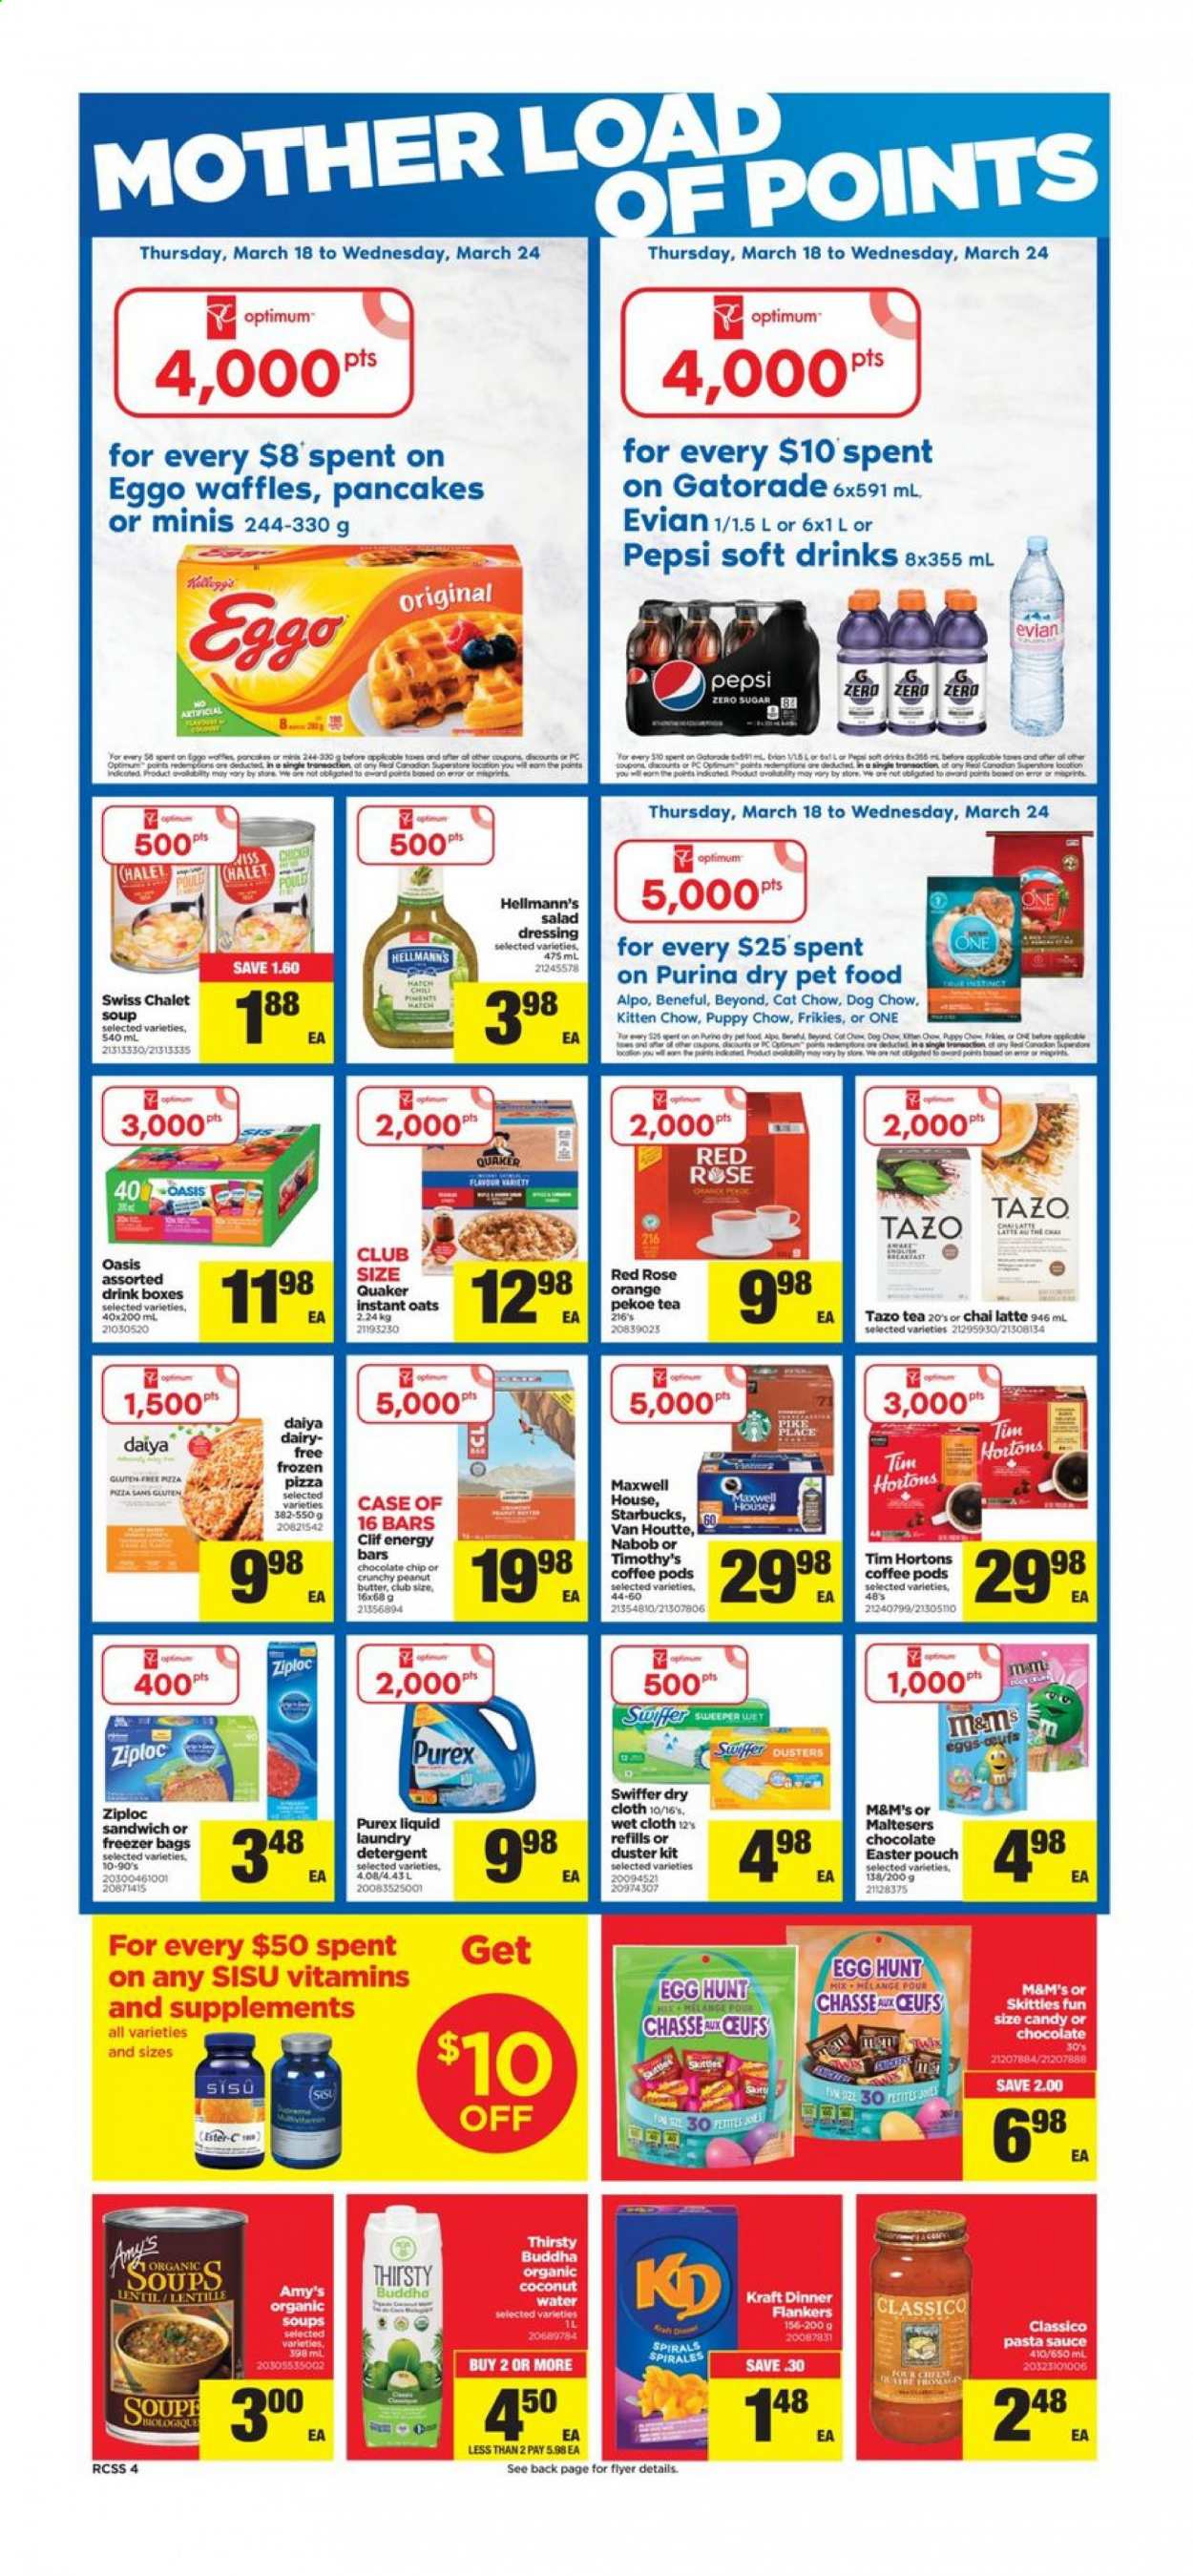 thumbnail - Real Canadian Superstore Flyer - March 18, 2021 - March 24, 2021 - Sales products - waffles, pizza, pasta sauce, sandwich, soup, sauce, Quaker, Kraft®, eggs, Hellmann’s, potato fries, chocolate chips, Maltesers, Skittles, oats, energy bar, salad dressing, dressing, Classico, peanut butter, Pepsi, coconut water, soft drink, Gatorade, Evian, tea, coffee pods, Starbucks, rosé wine, Swiffer, laundry detergent, Purex, Ziploc, duster, freezer bag, animal food, Dog Chow, Purina, Optimum, Alpo, rose, Ester-c, M&M's. Page 4.